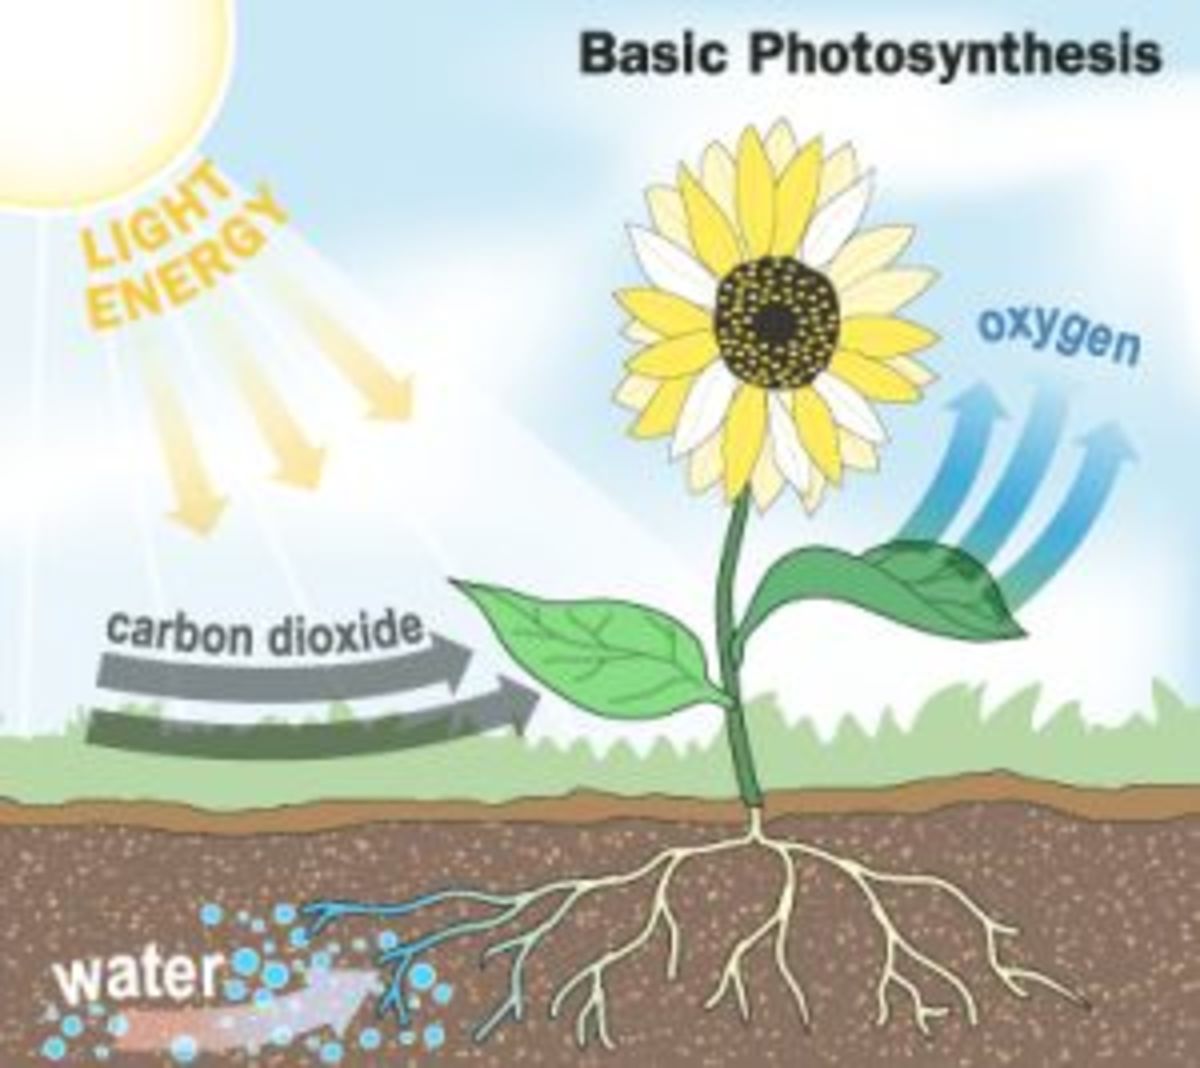 A Simple Diagram of Photosynthesis | HubPages